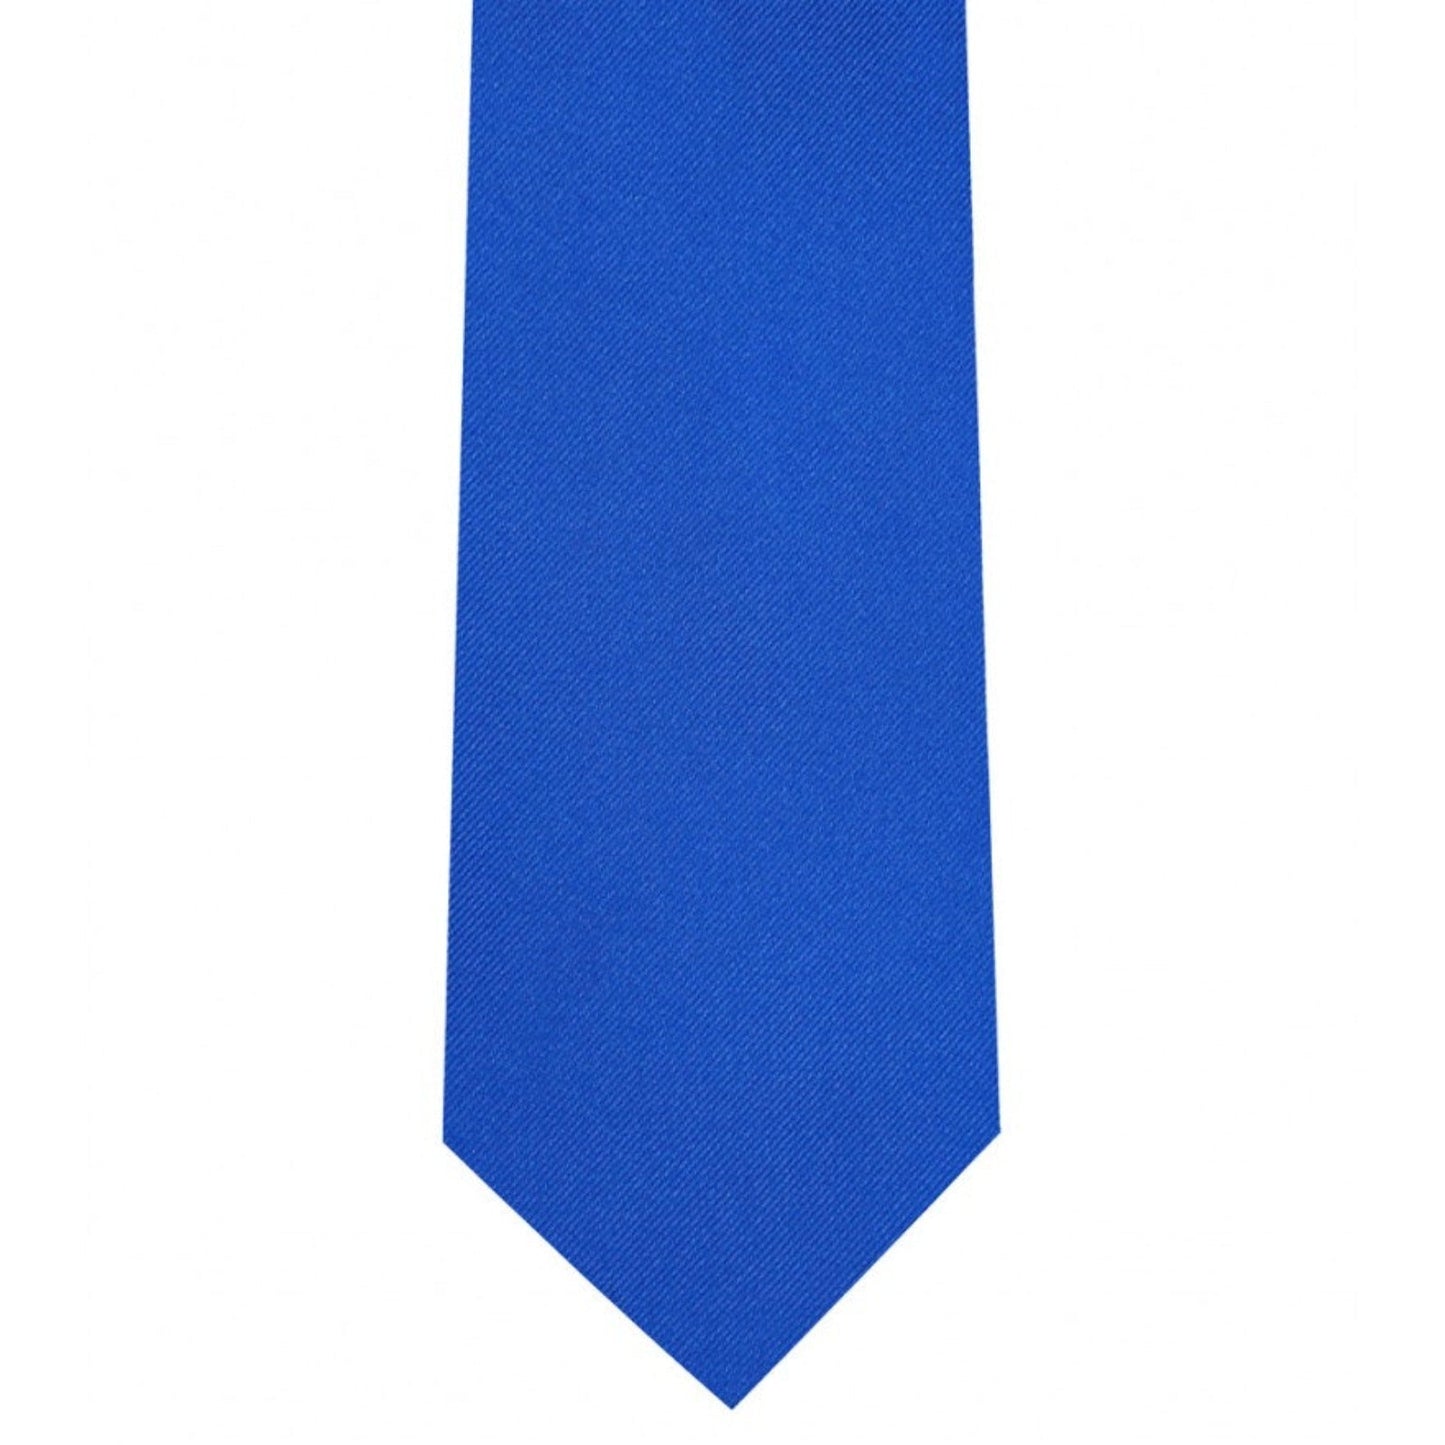 Classic Royal Blue Tie Ultra Skinny tie width 2.25 inches With Matching Pocket Square | KCT Menswear